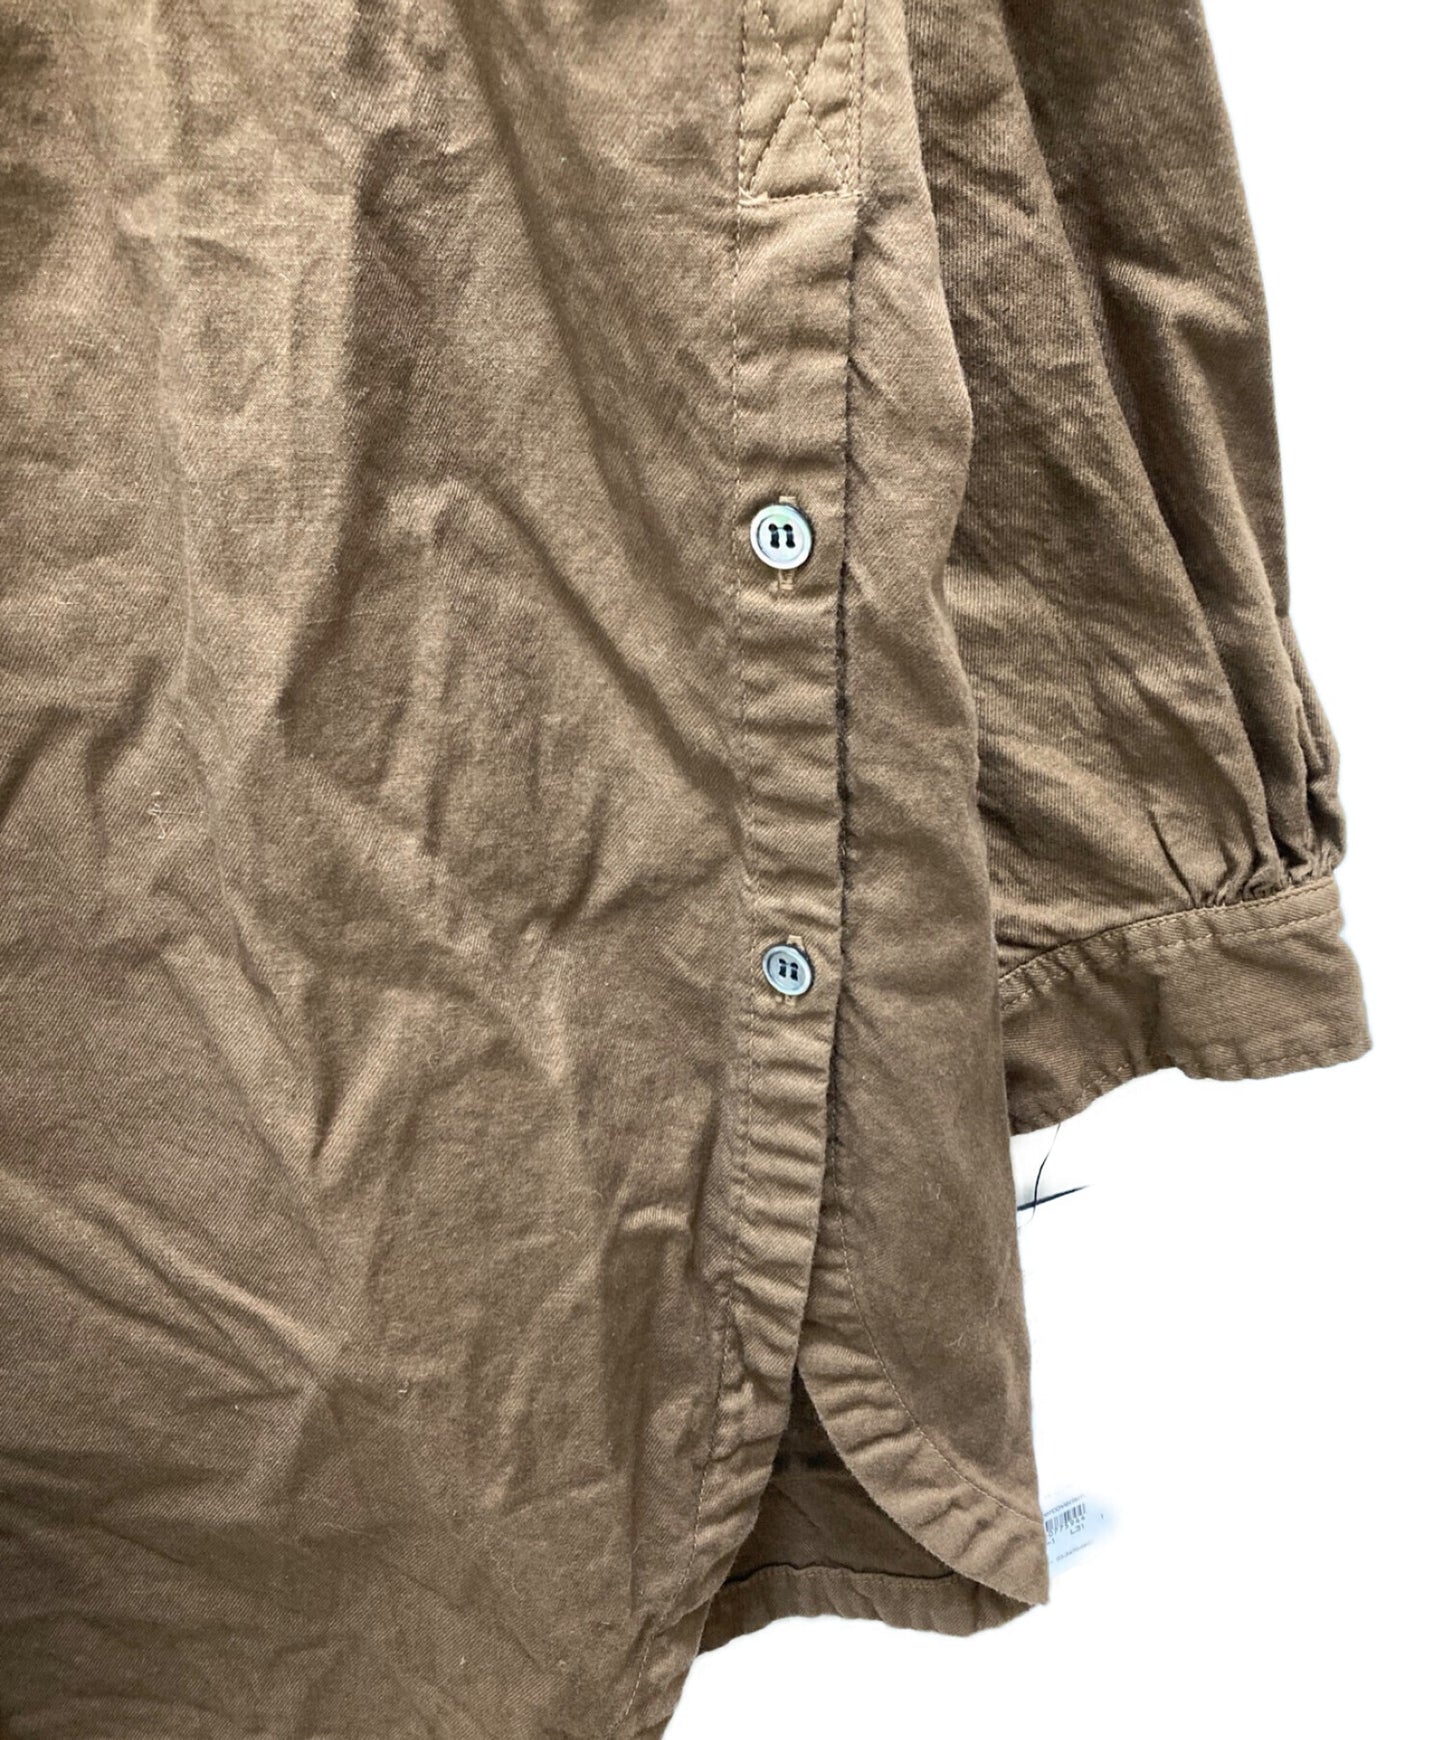 [Pre-owned] UNDERCOVER Jewelery C VIERA Overshirt UC1A1401-1